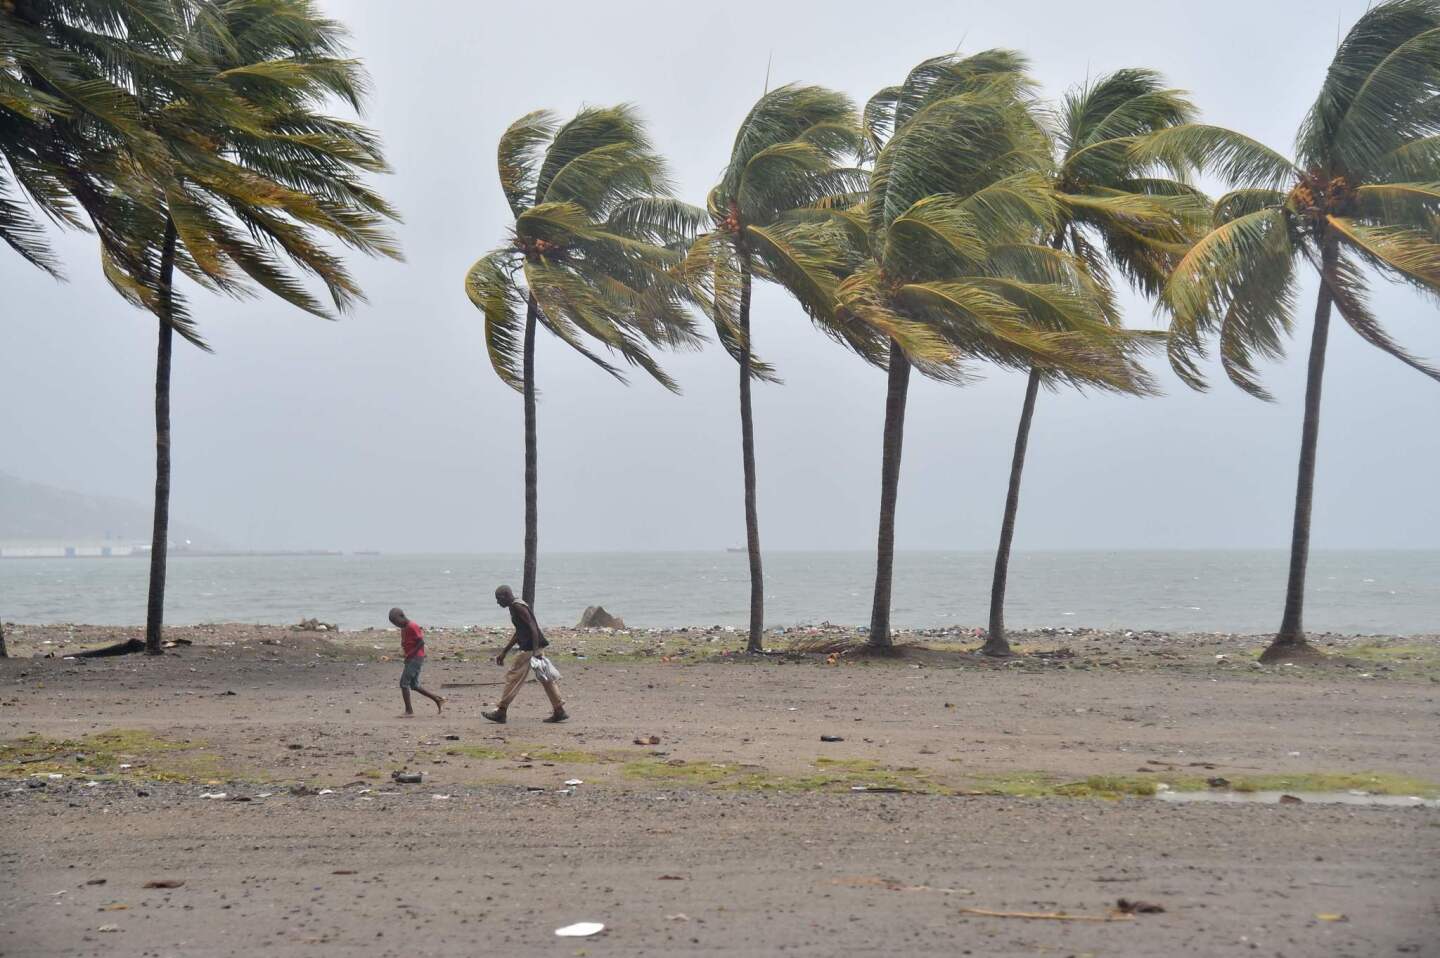 Haitian people walk through the wind and rain on a beach, in Cap-Haitien on September 7, 2017, as Hurricane Irma approaches. Irma was packing maximum sustained winds of up to 185 mph (295 kph) as it followed a projected path that would see it hit the northern edges of the Dominican Republic and Haiti on Thursday, continuing past eastern Cuba before veering north for Florida.